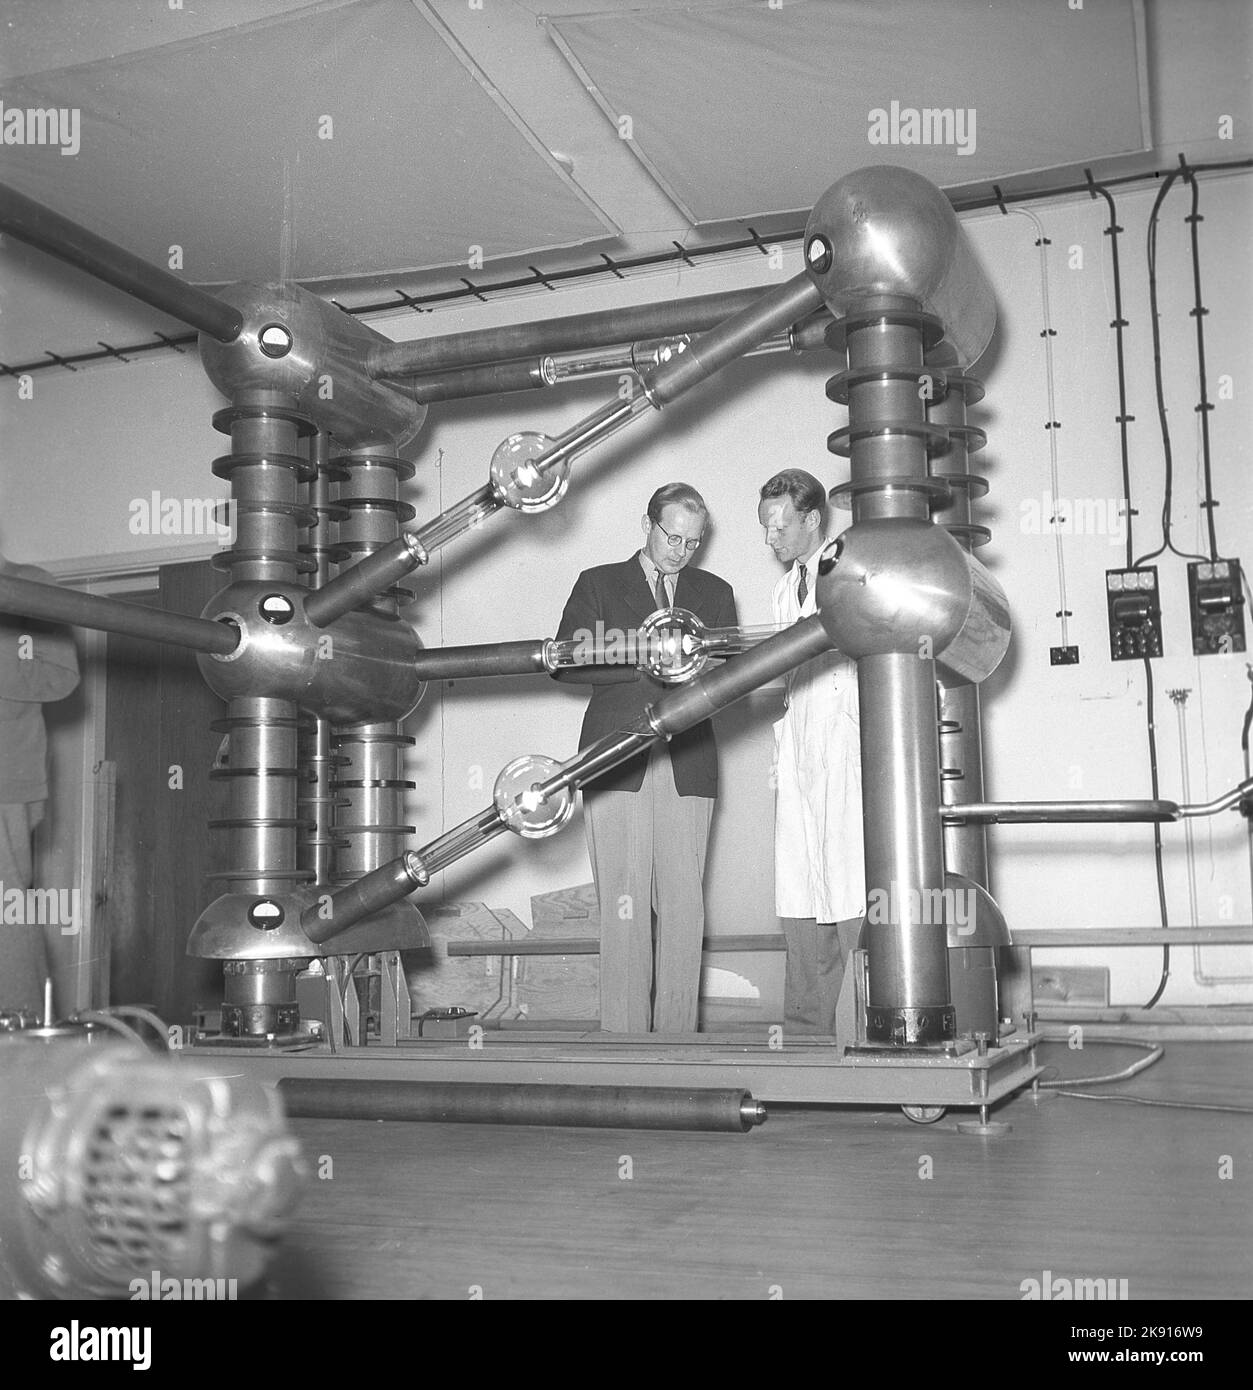 Man and machine in the 1940s. Two men are seen in a room with a unusual construction of unknown purpose. Picture taken at KTH Royal institute of Technology. Sweden 1945 Kristoffersson ref P47-3 Stock Photo